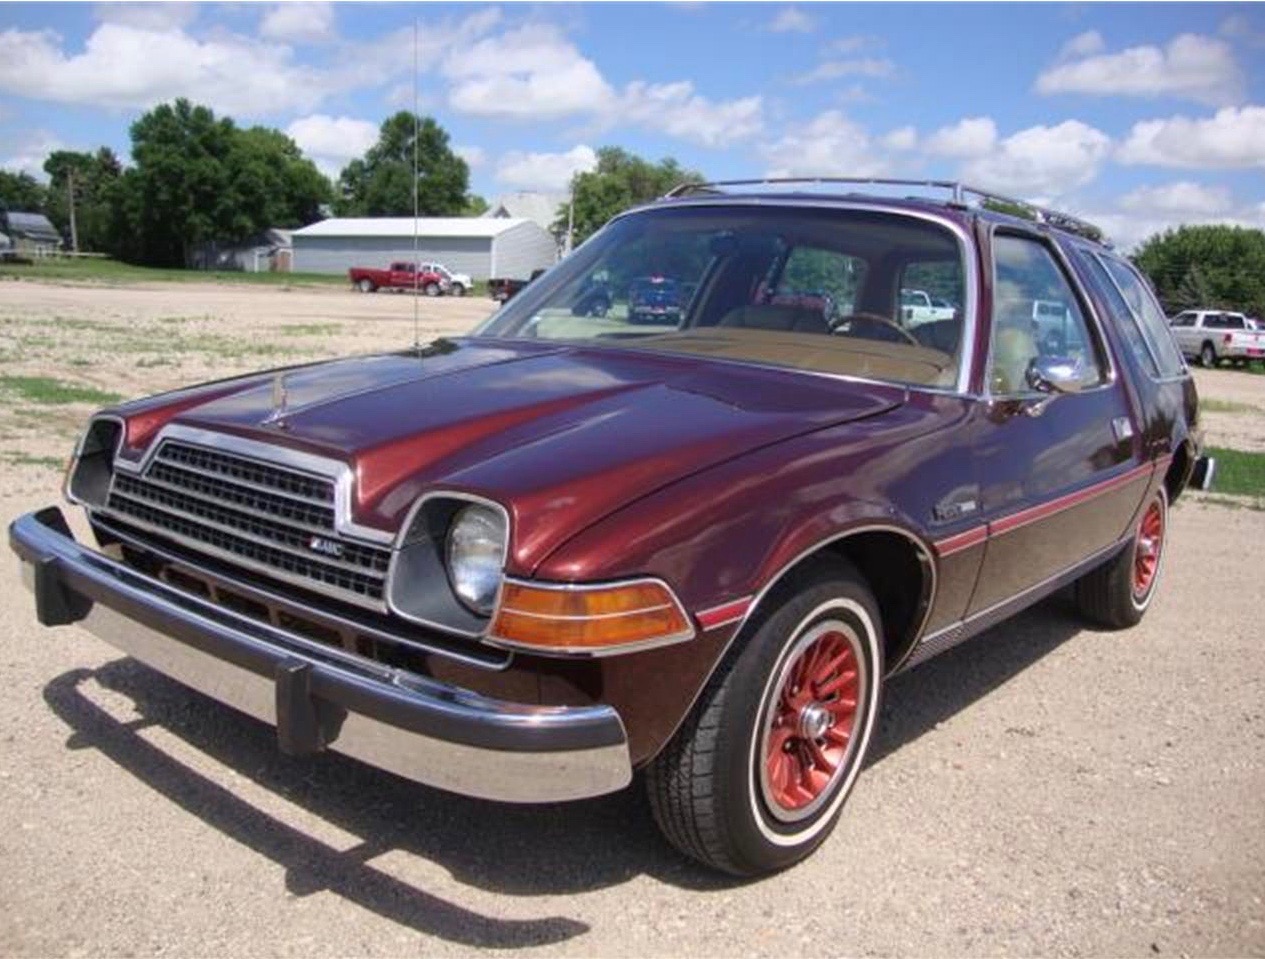 1977 AMC Pacer, Pacesetter? In 1977 AMC added station wagon room to its Pacer, ClassicCars.com Journal